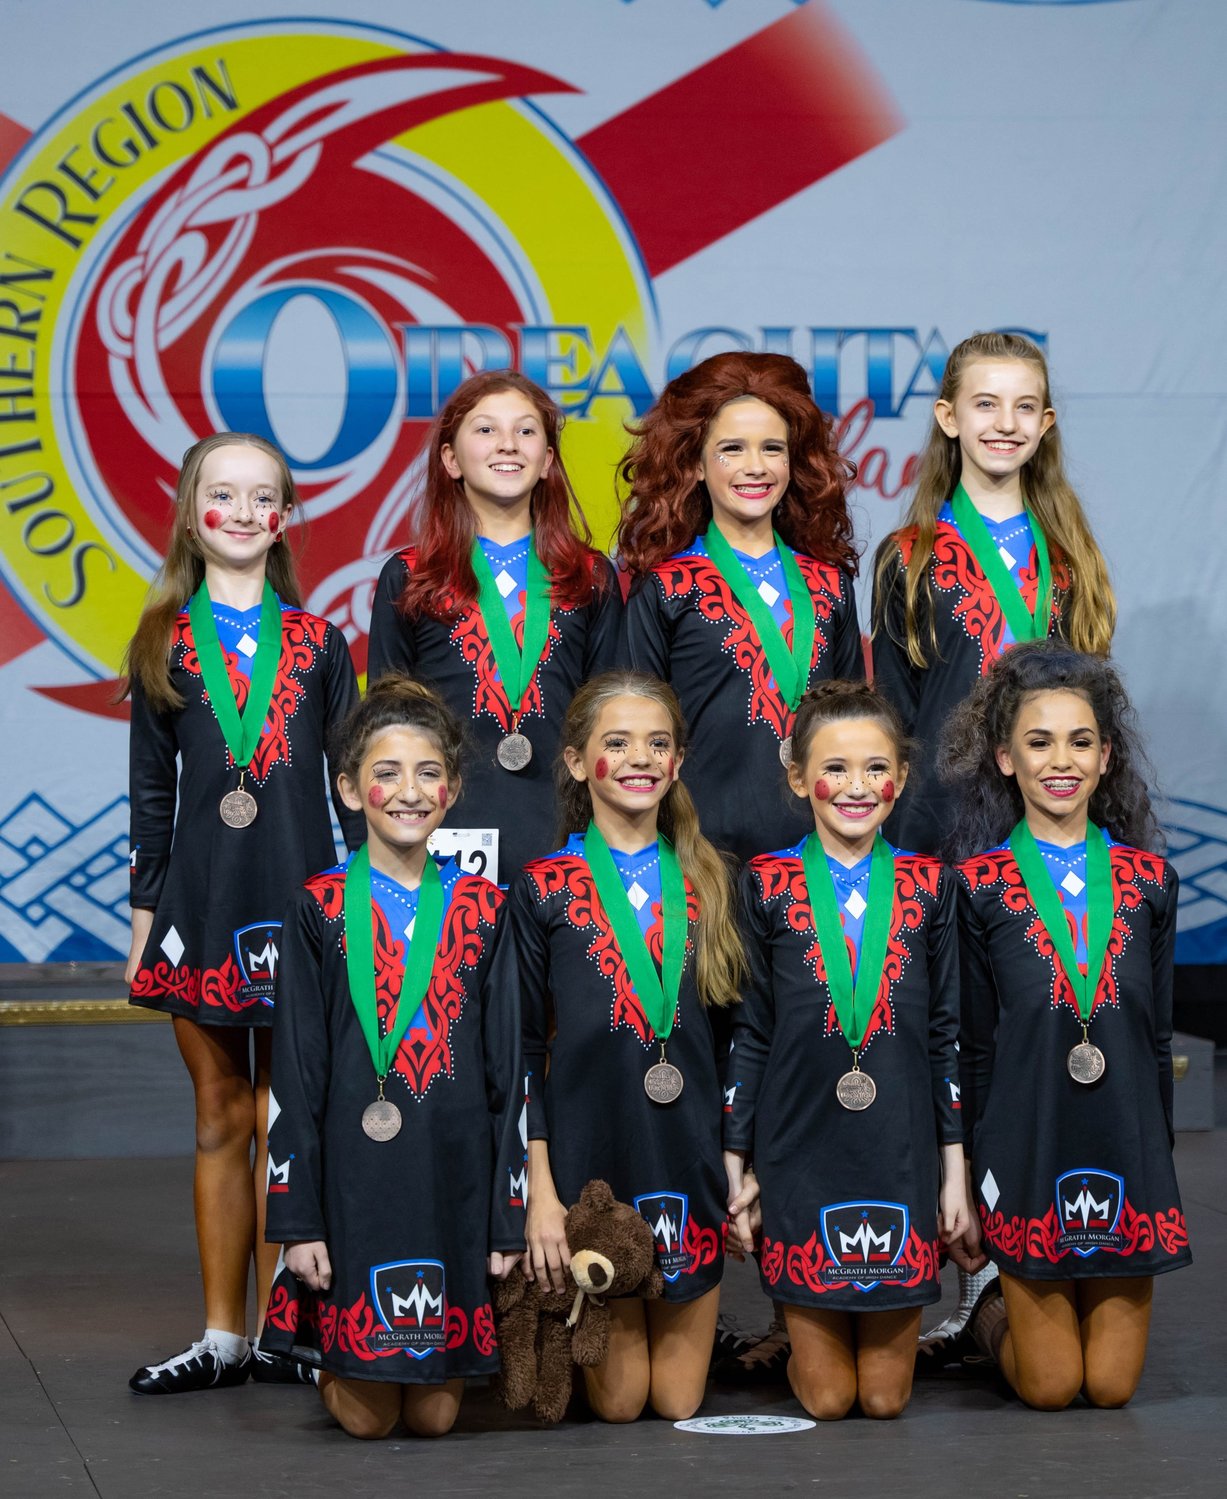 Isabella “Izzy” Renzi (bottom right) was one of several McGrath Morgan Academy of Irish Dance members who excelled during the Irish Dance Teachers Association of North America (IDTANA) Southern Region Oireachtas in Orlando this December.